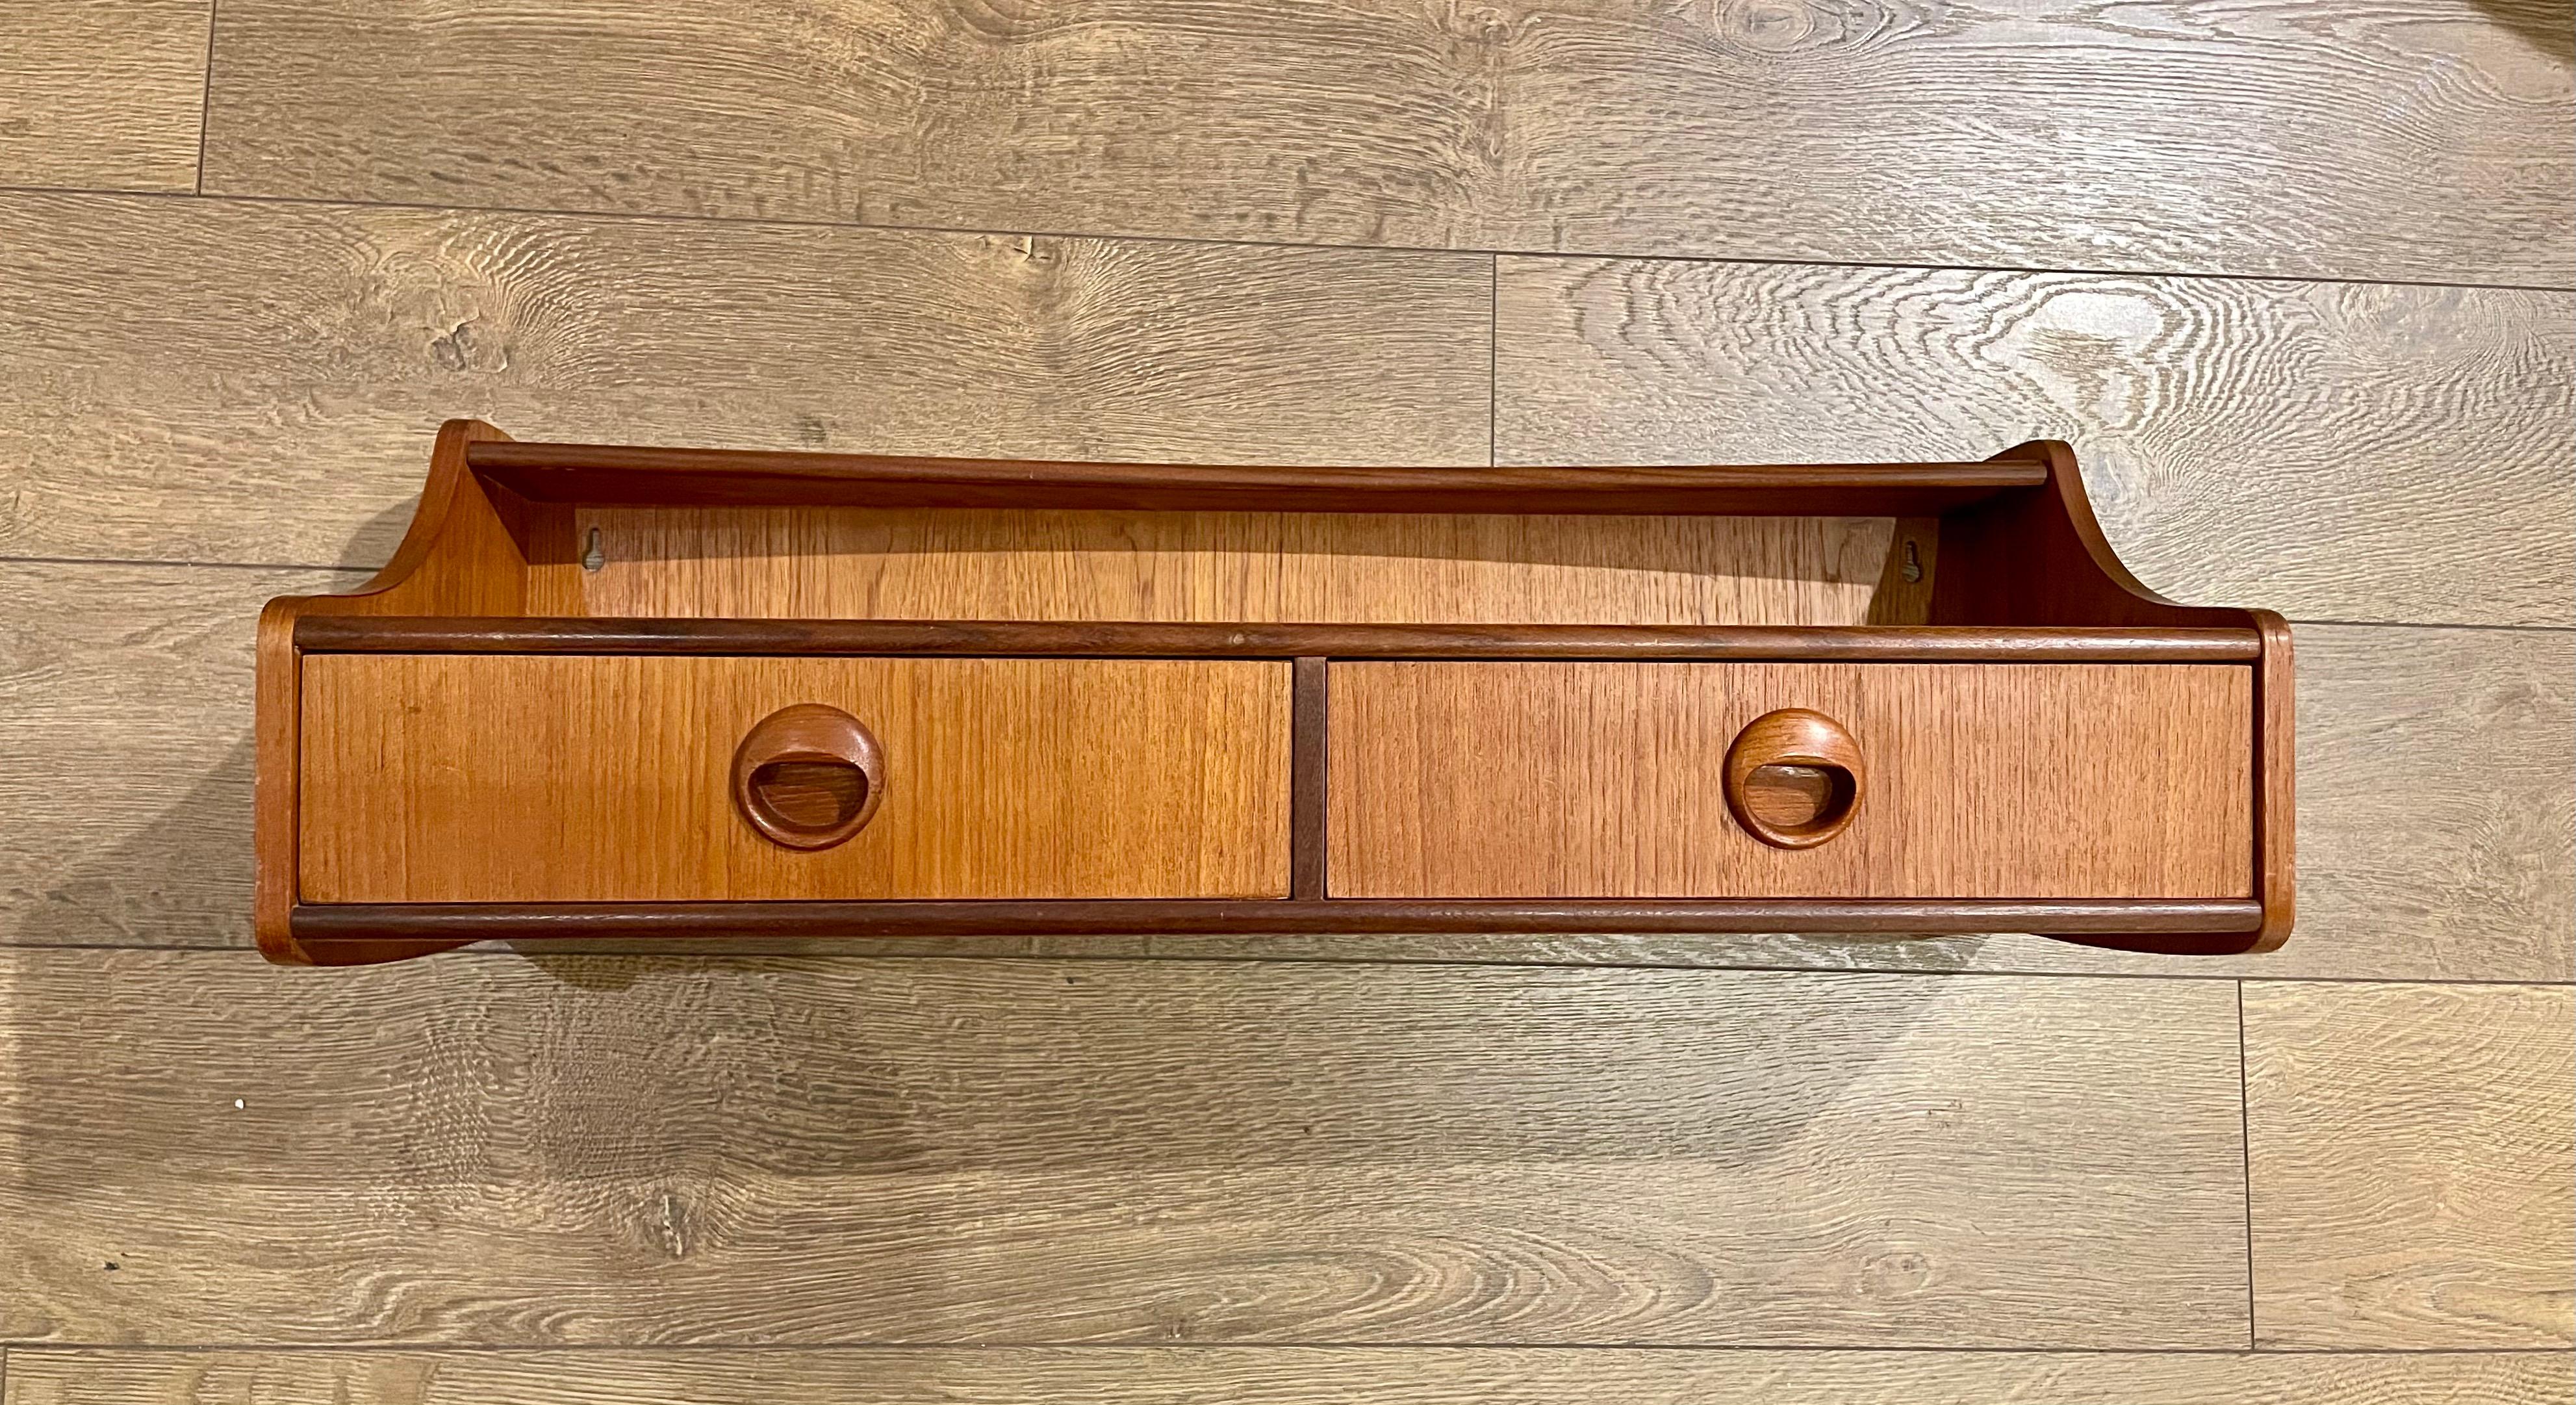 Versatile shelf double drawer wall mounted Danish modern teak entry table, design by TTalgo Mobler circa 1950's. Great craftsmanship dovetail drawers 2 screws hold it in place. Original finish nice clean condition we have oiled the piece.